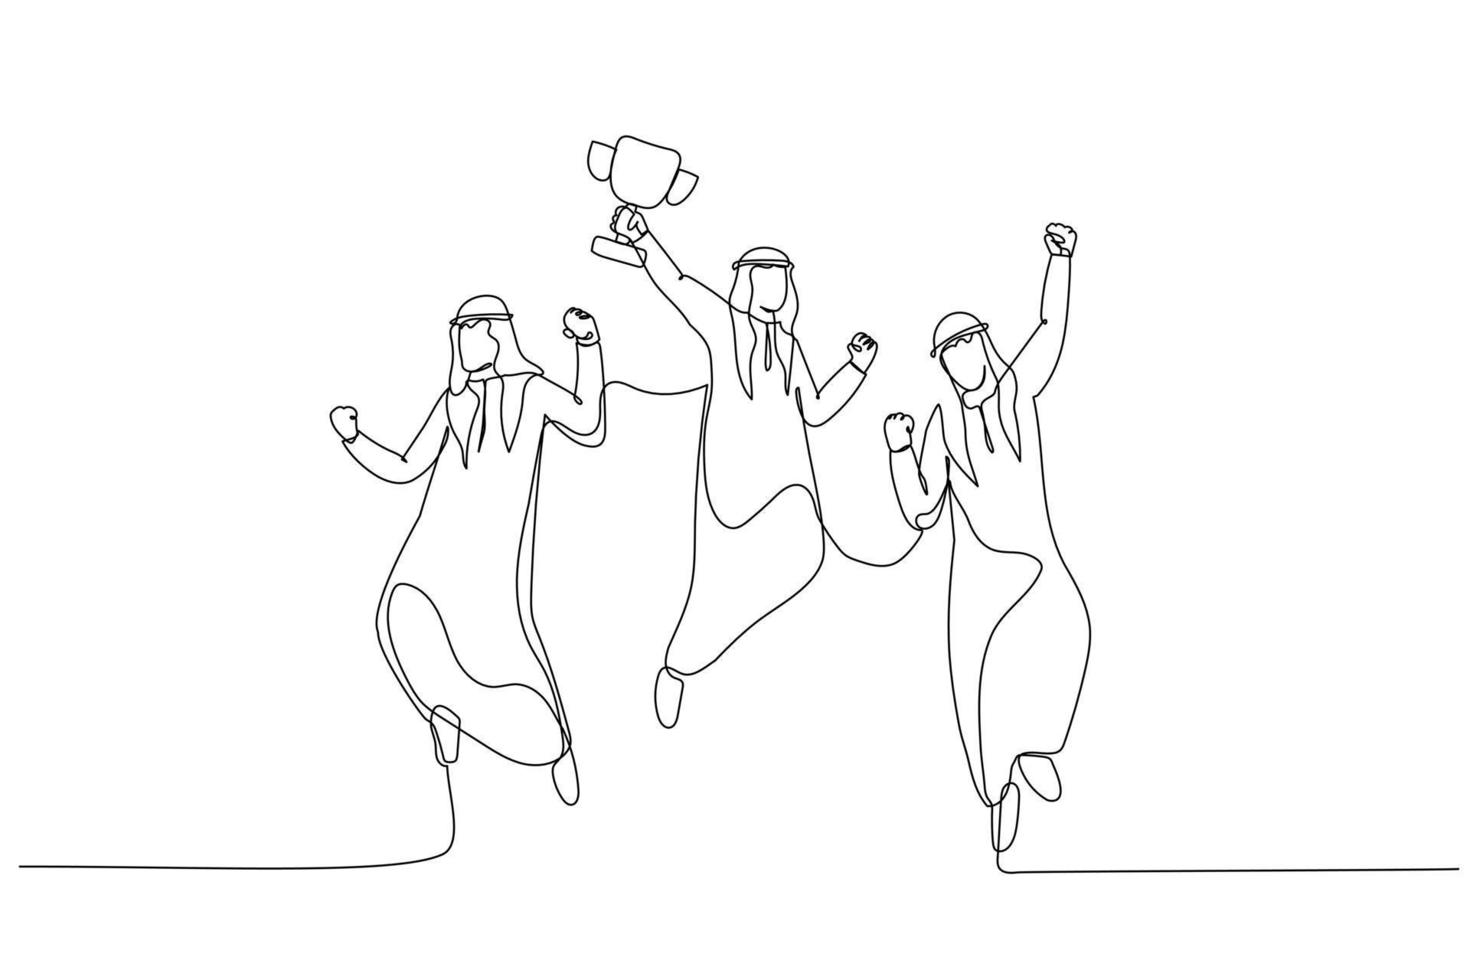 Drawing of arab businessman jumps in the air with trophy cup in the hand getting recognition. Single continuous line art style vector